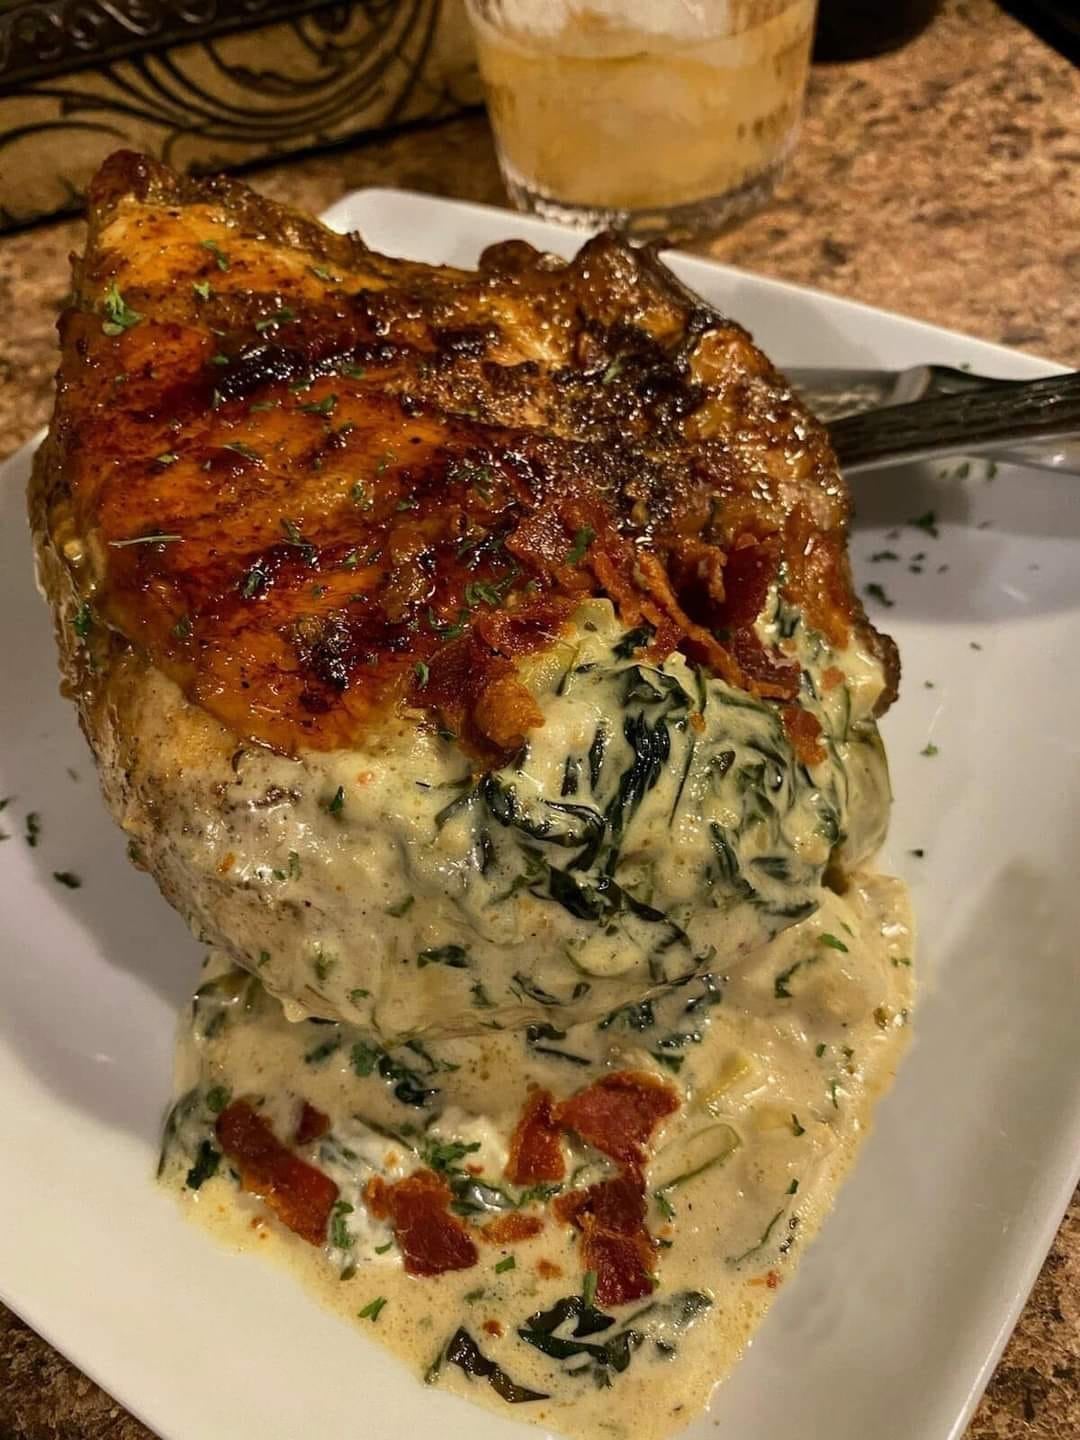 Chicken Breast Stuffed With Hot Bacon, Spinach